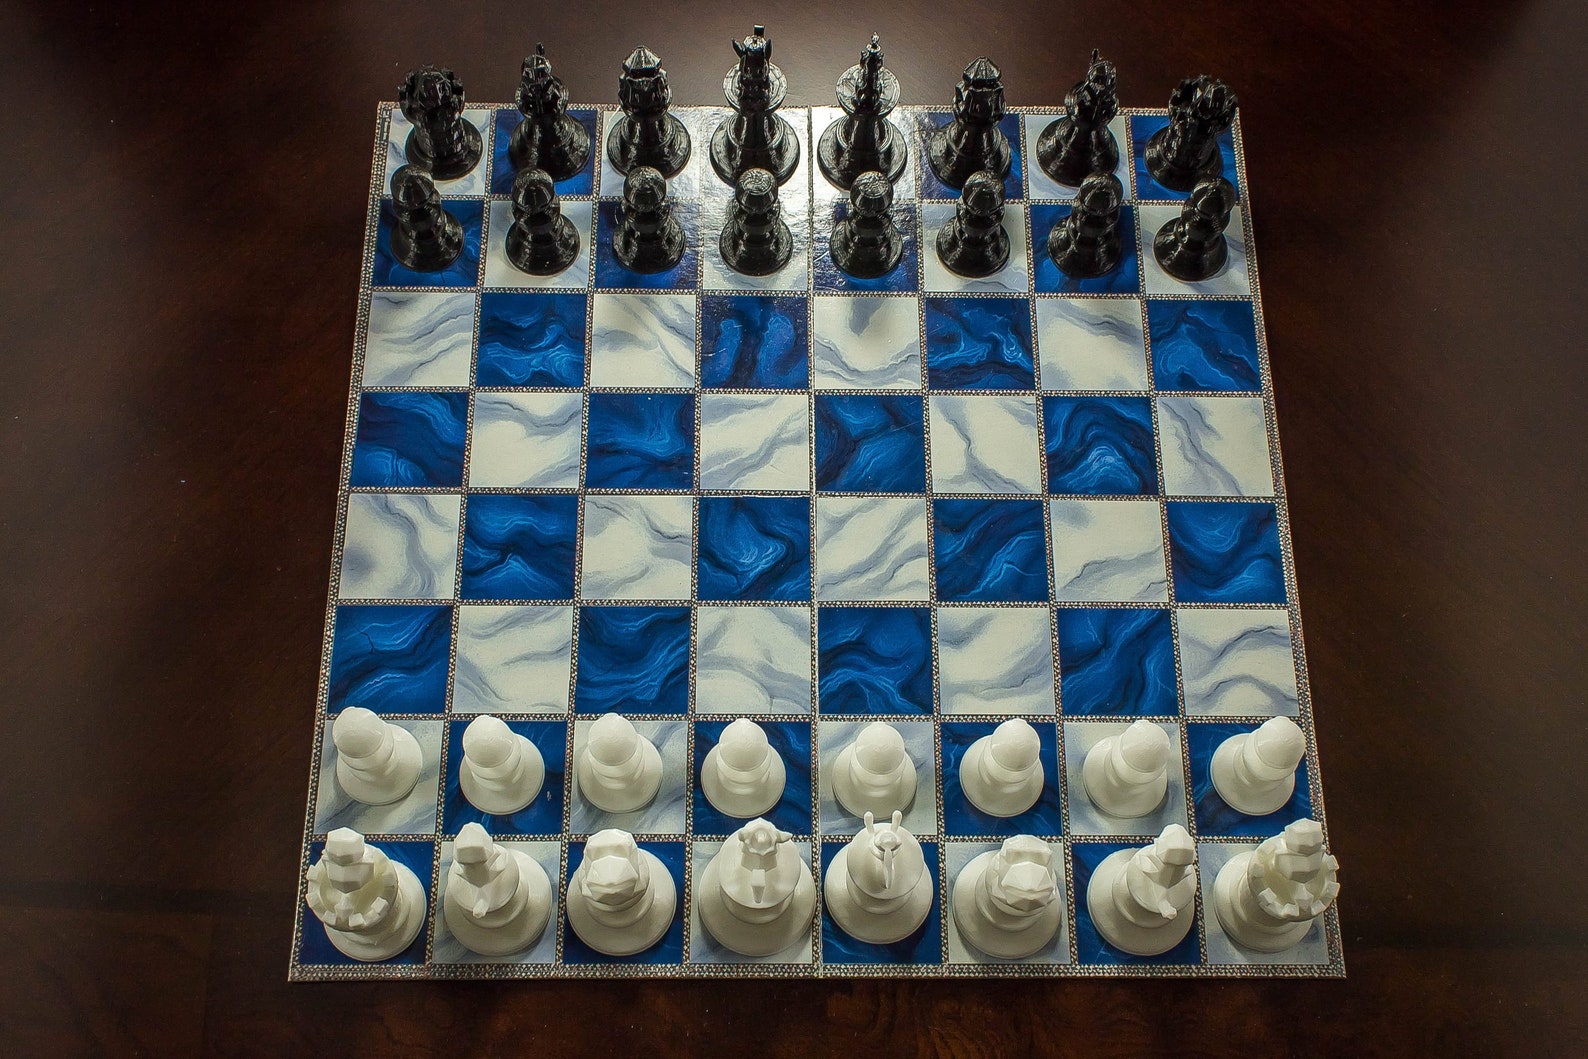 Chess Sets and Games That Add Style to Your Home